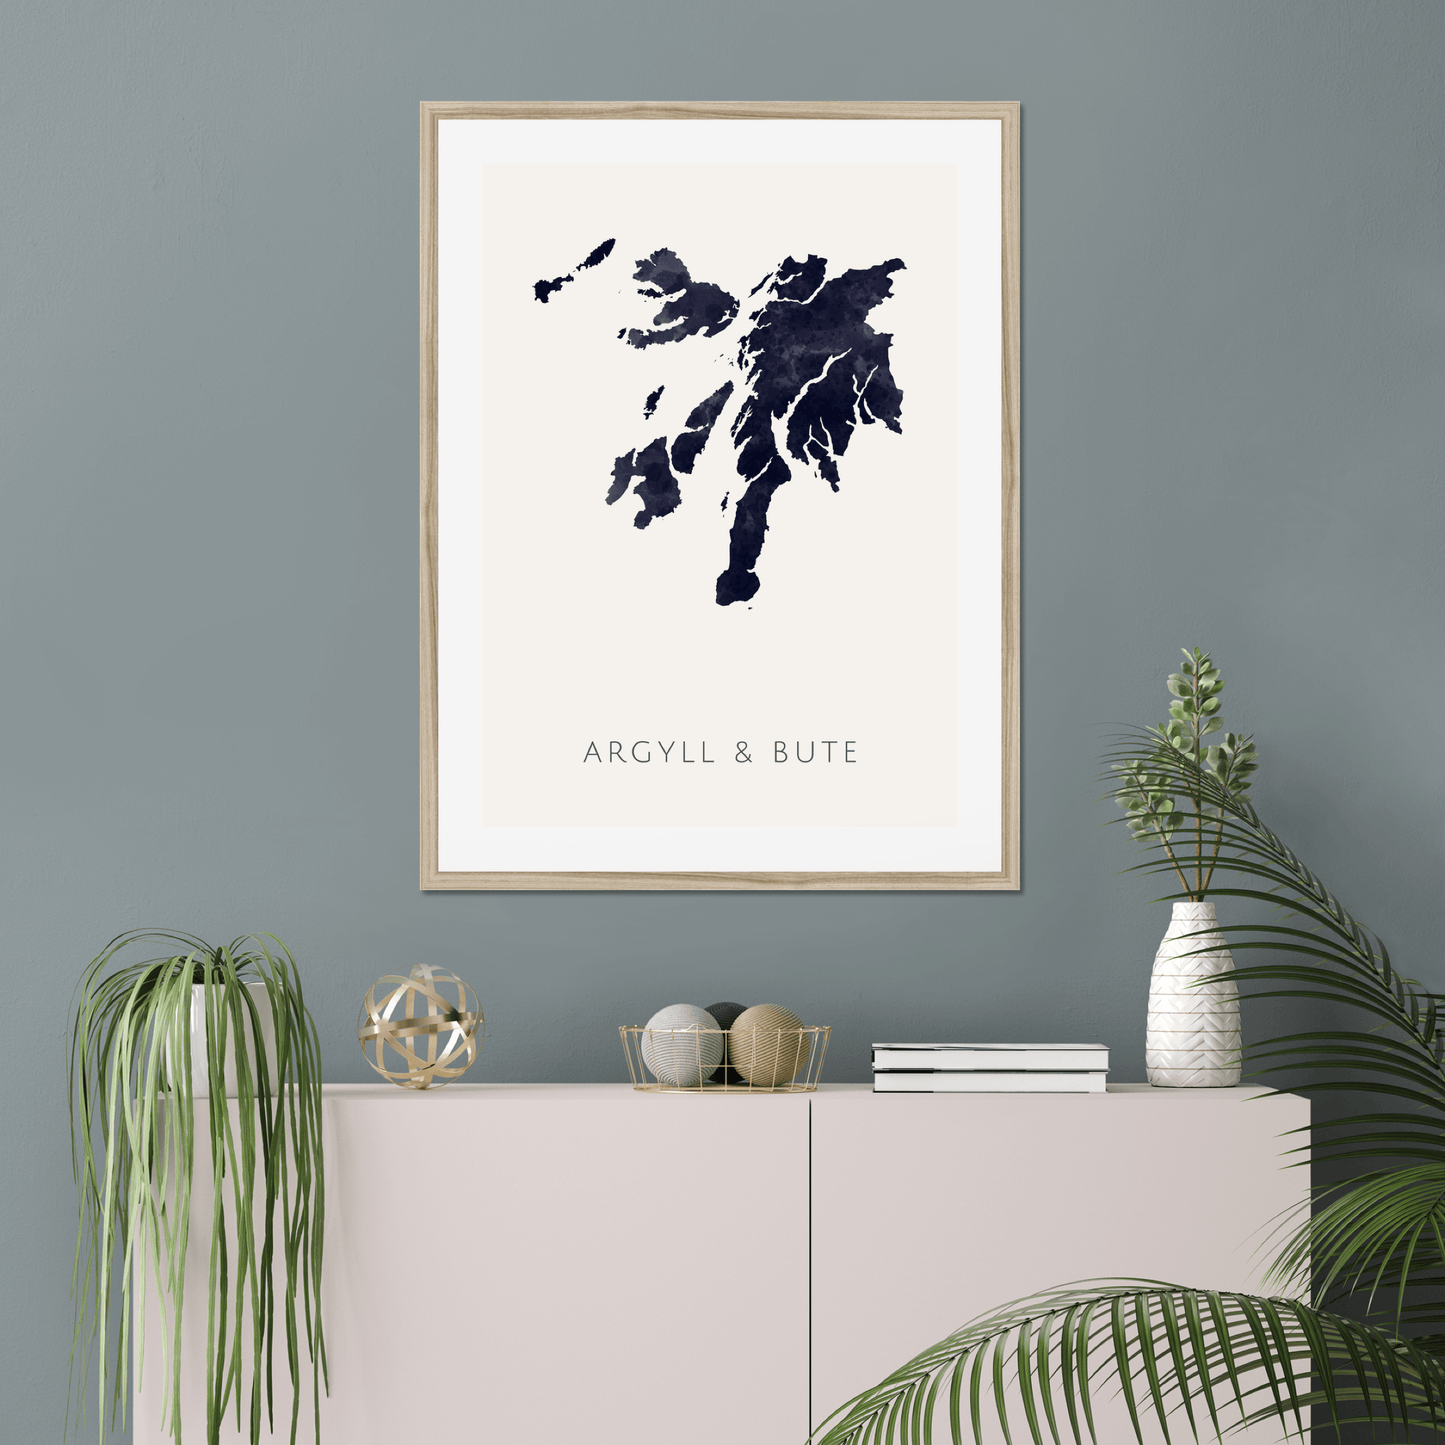 Argyll and Bute -  Framed & Mounted Map